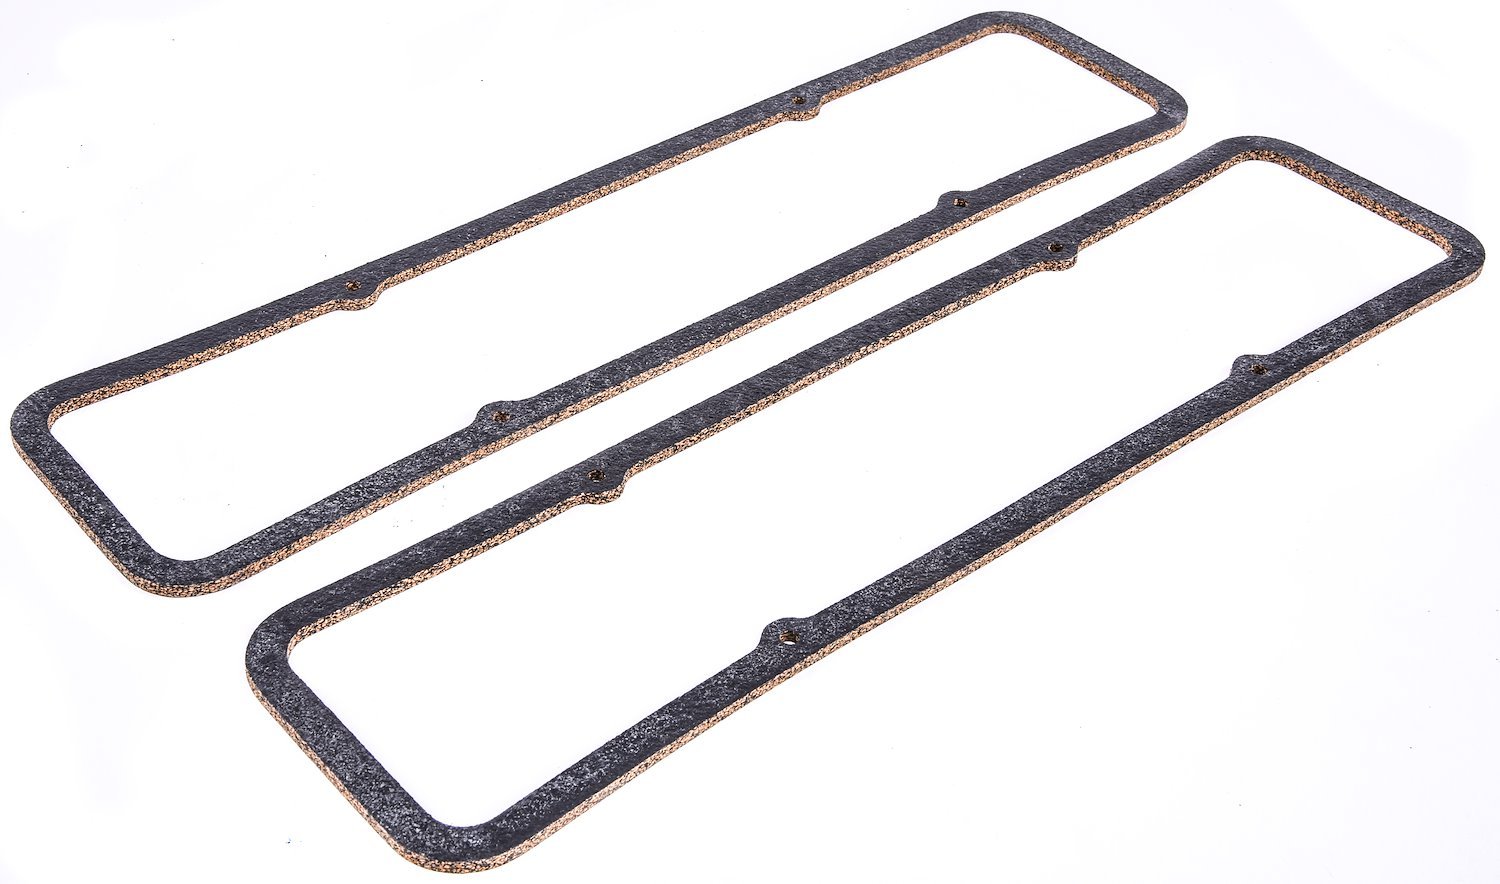 Valve Cover Gaskets Small Block Chevy